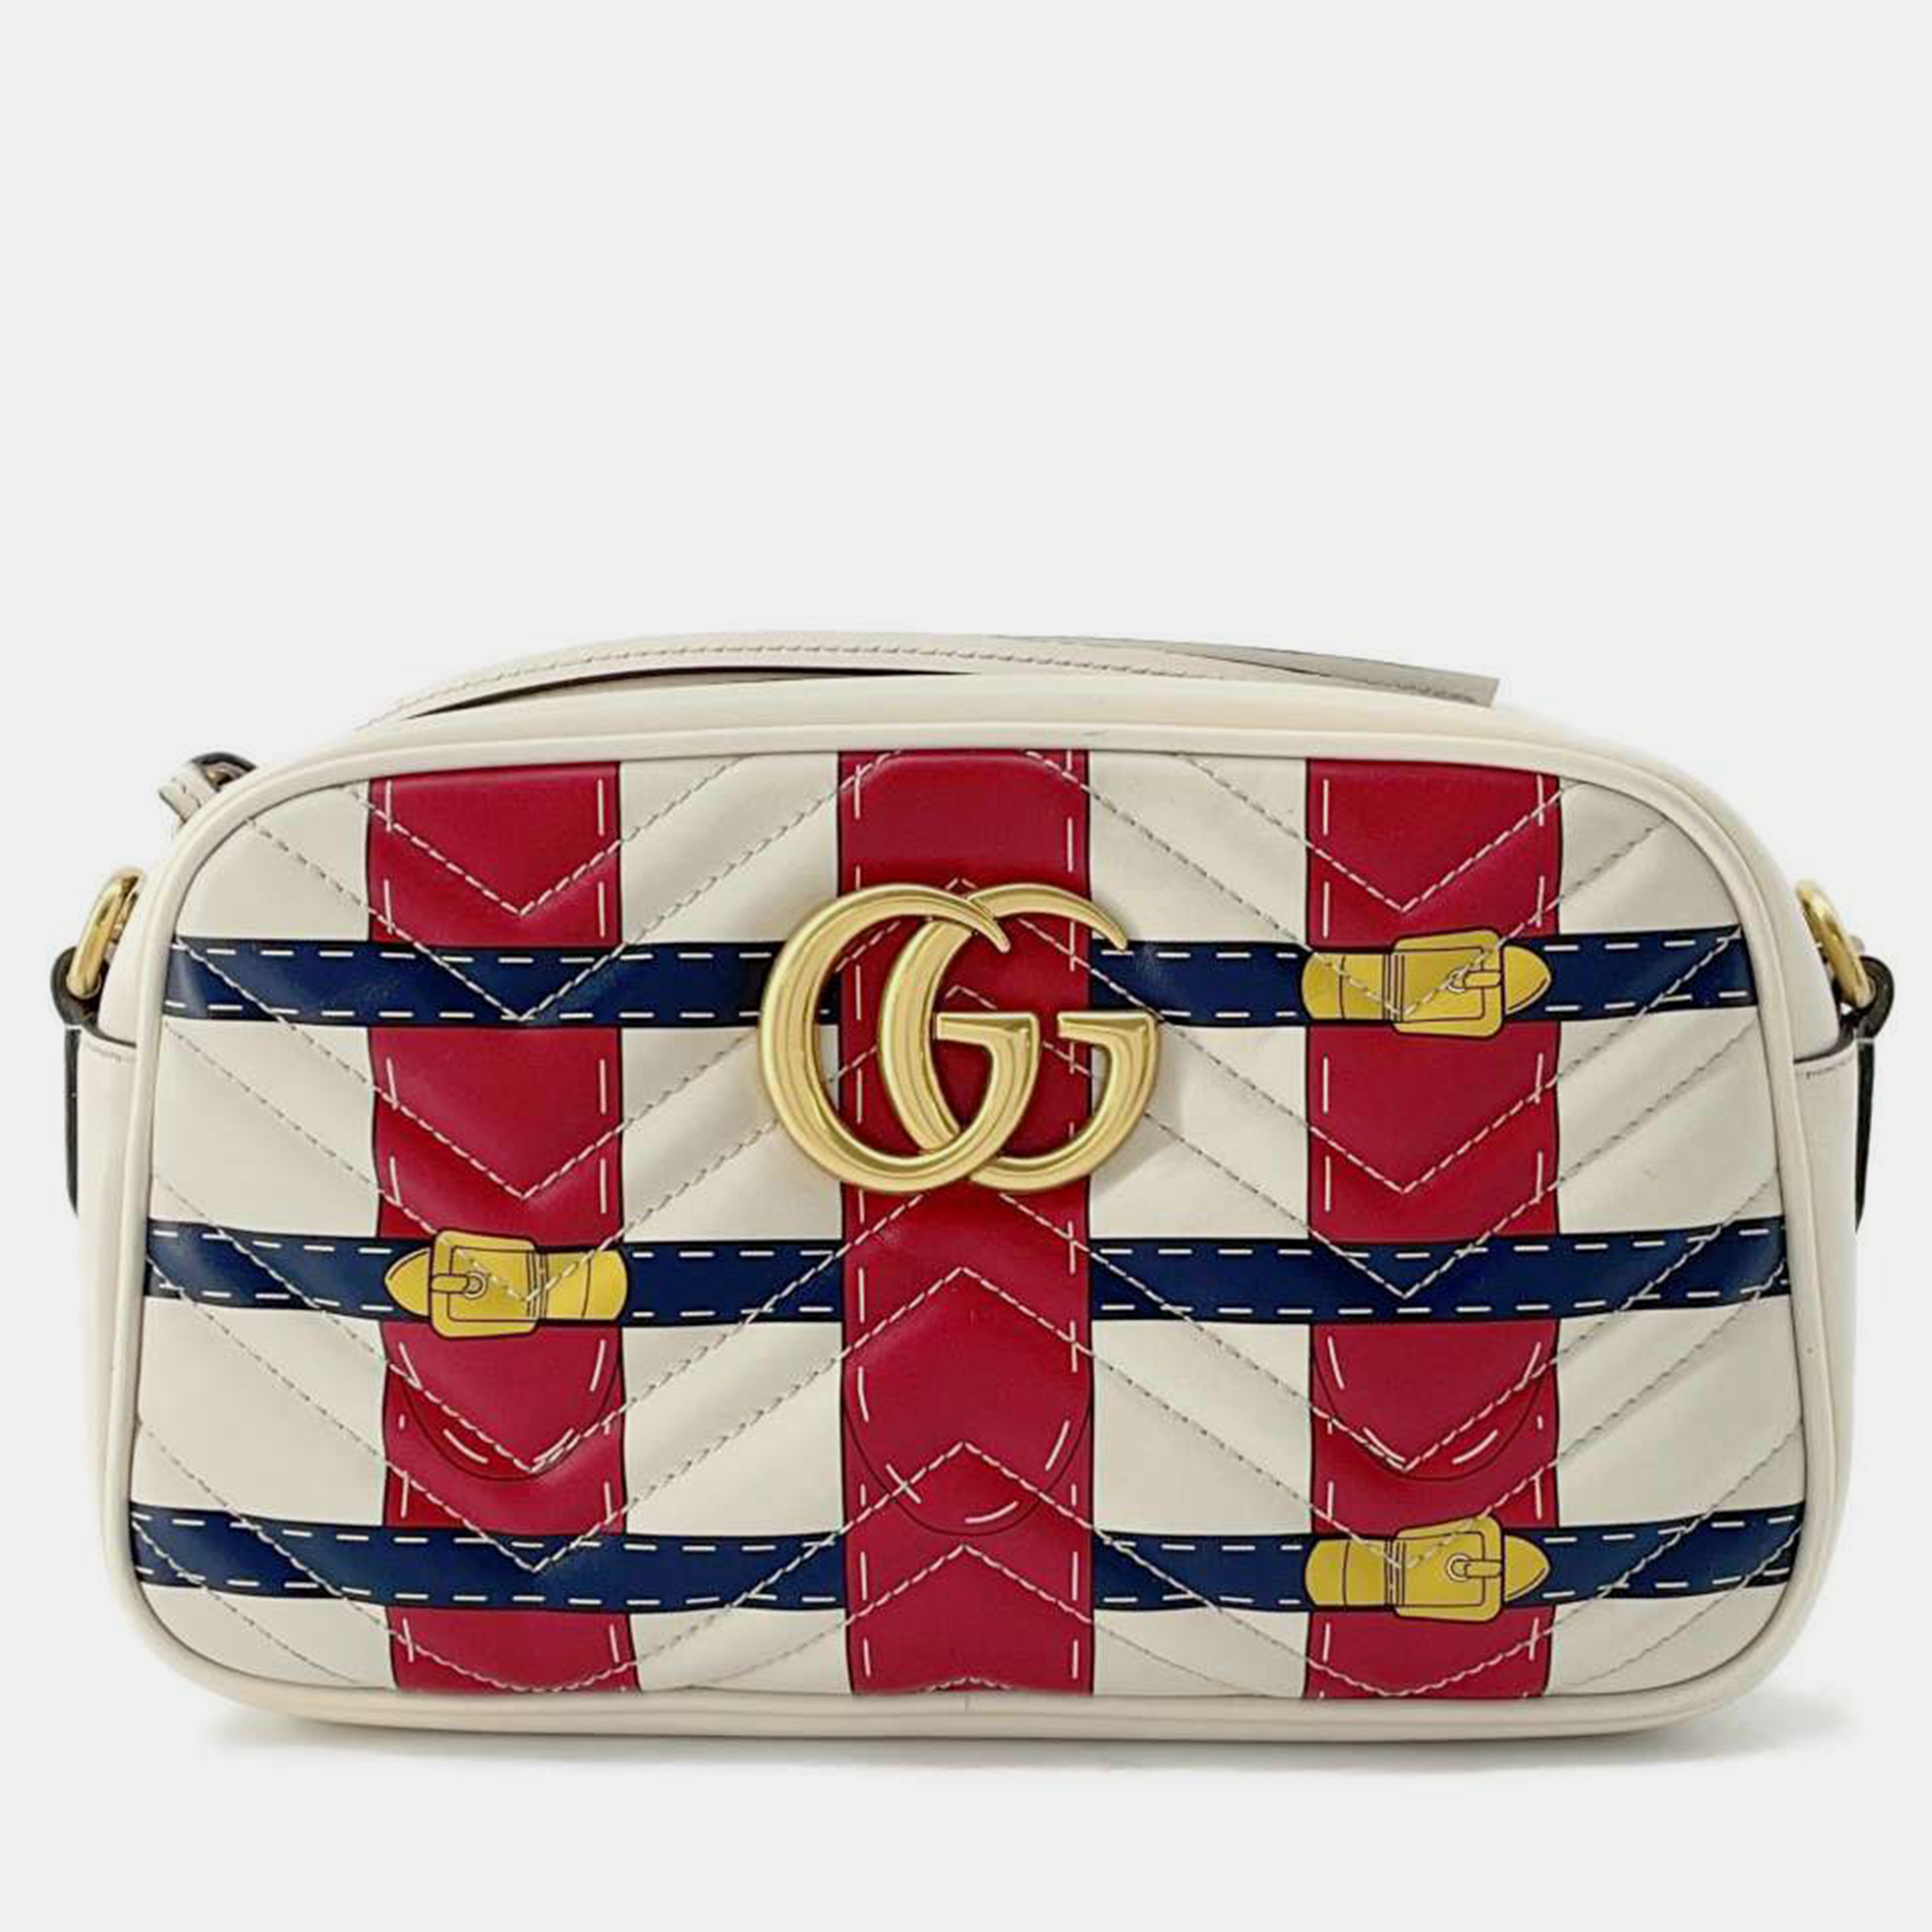 Gucci white/red leather gg marmont bag